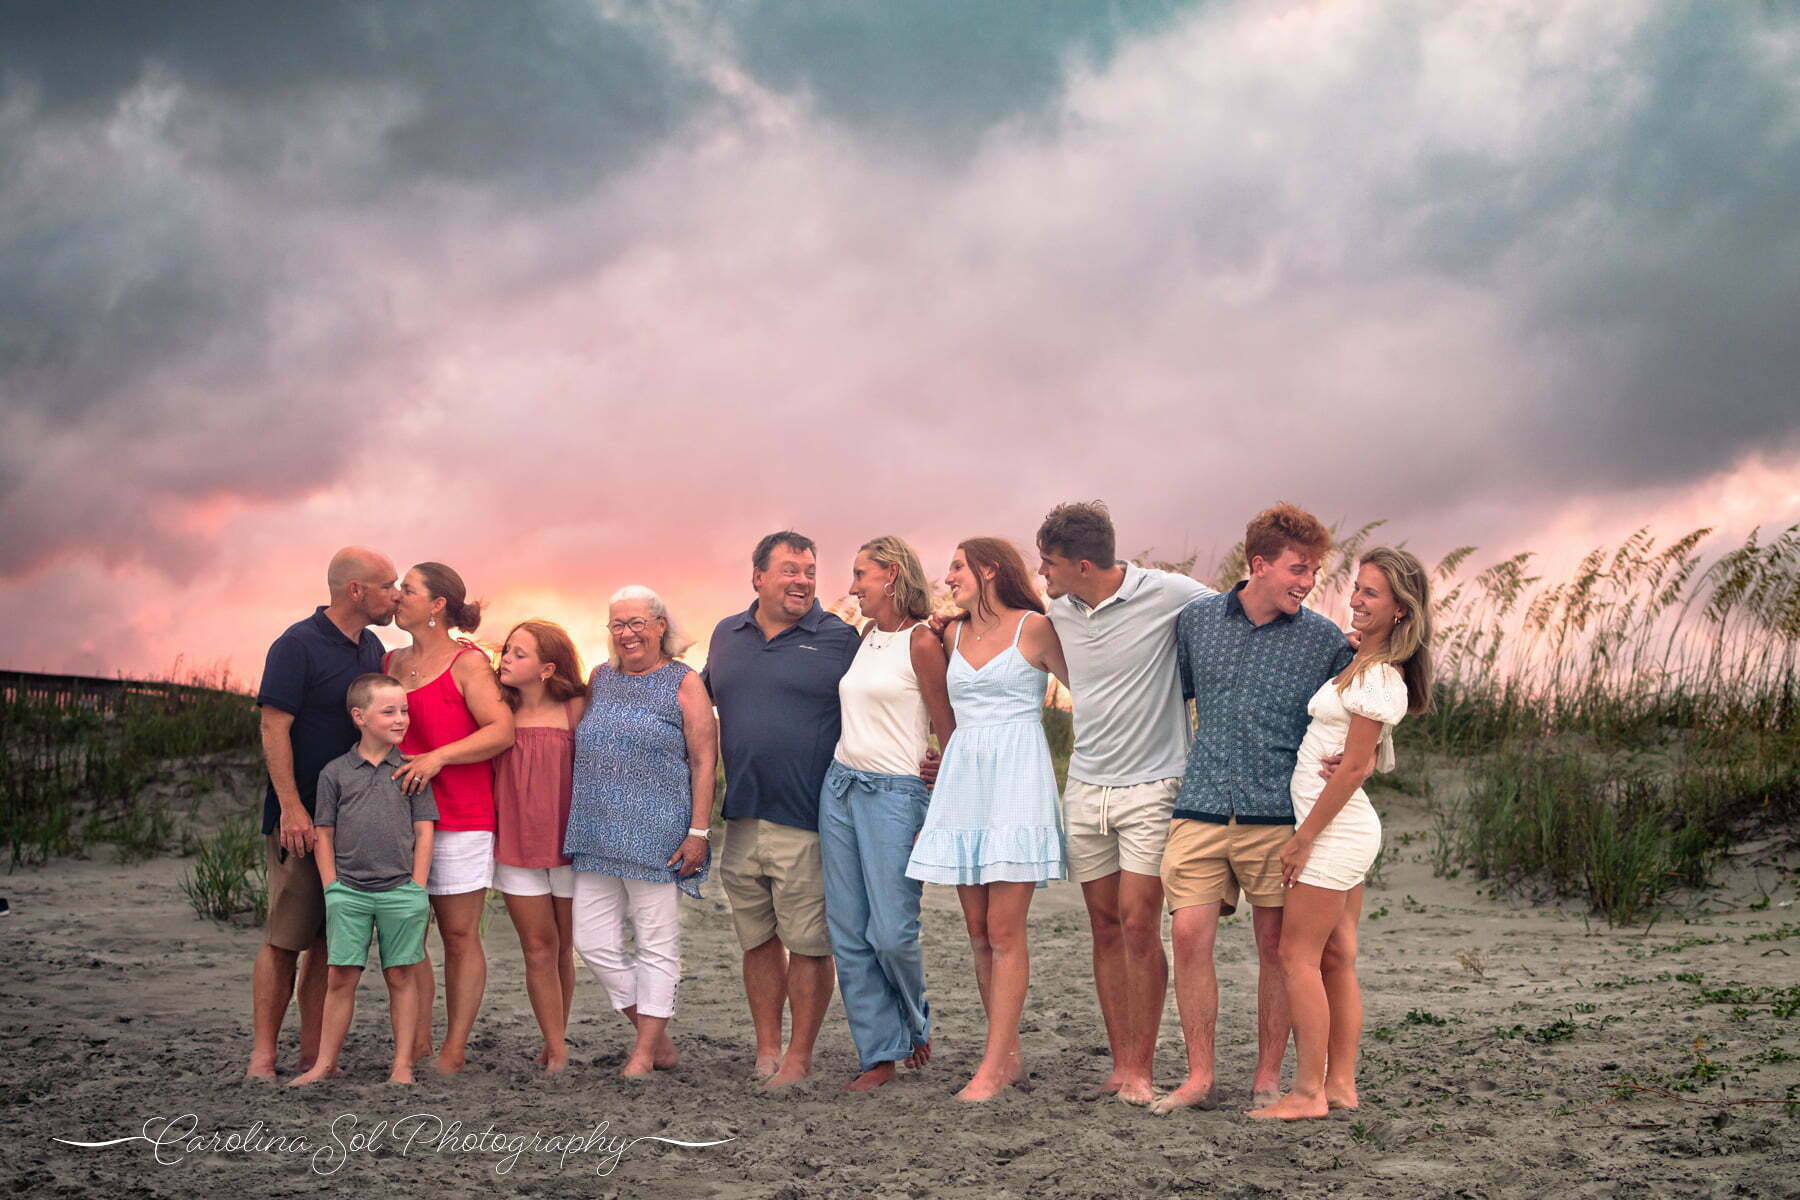 Sunset Beach extended family lifestyle photography.